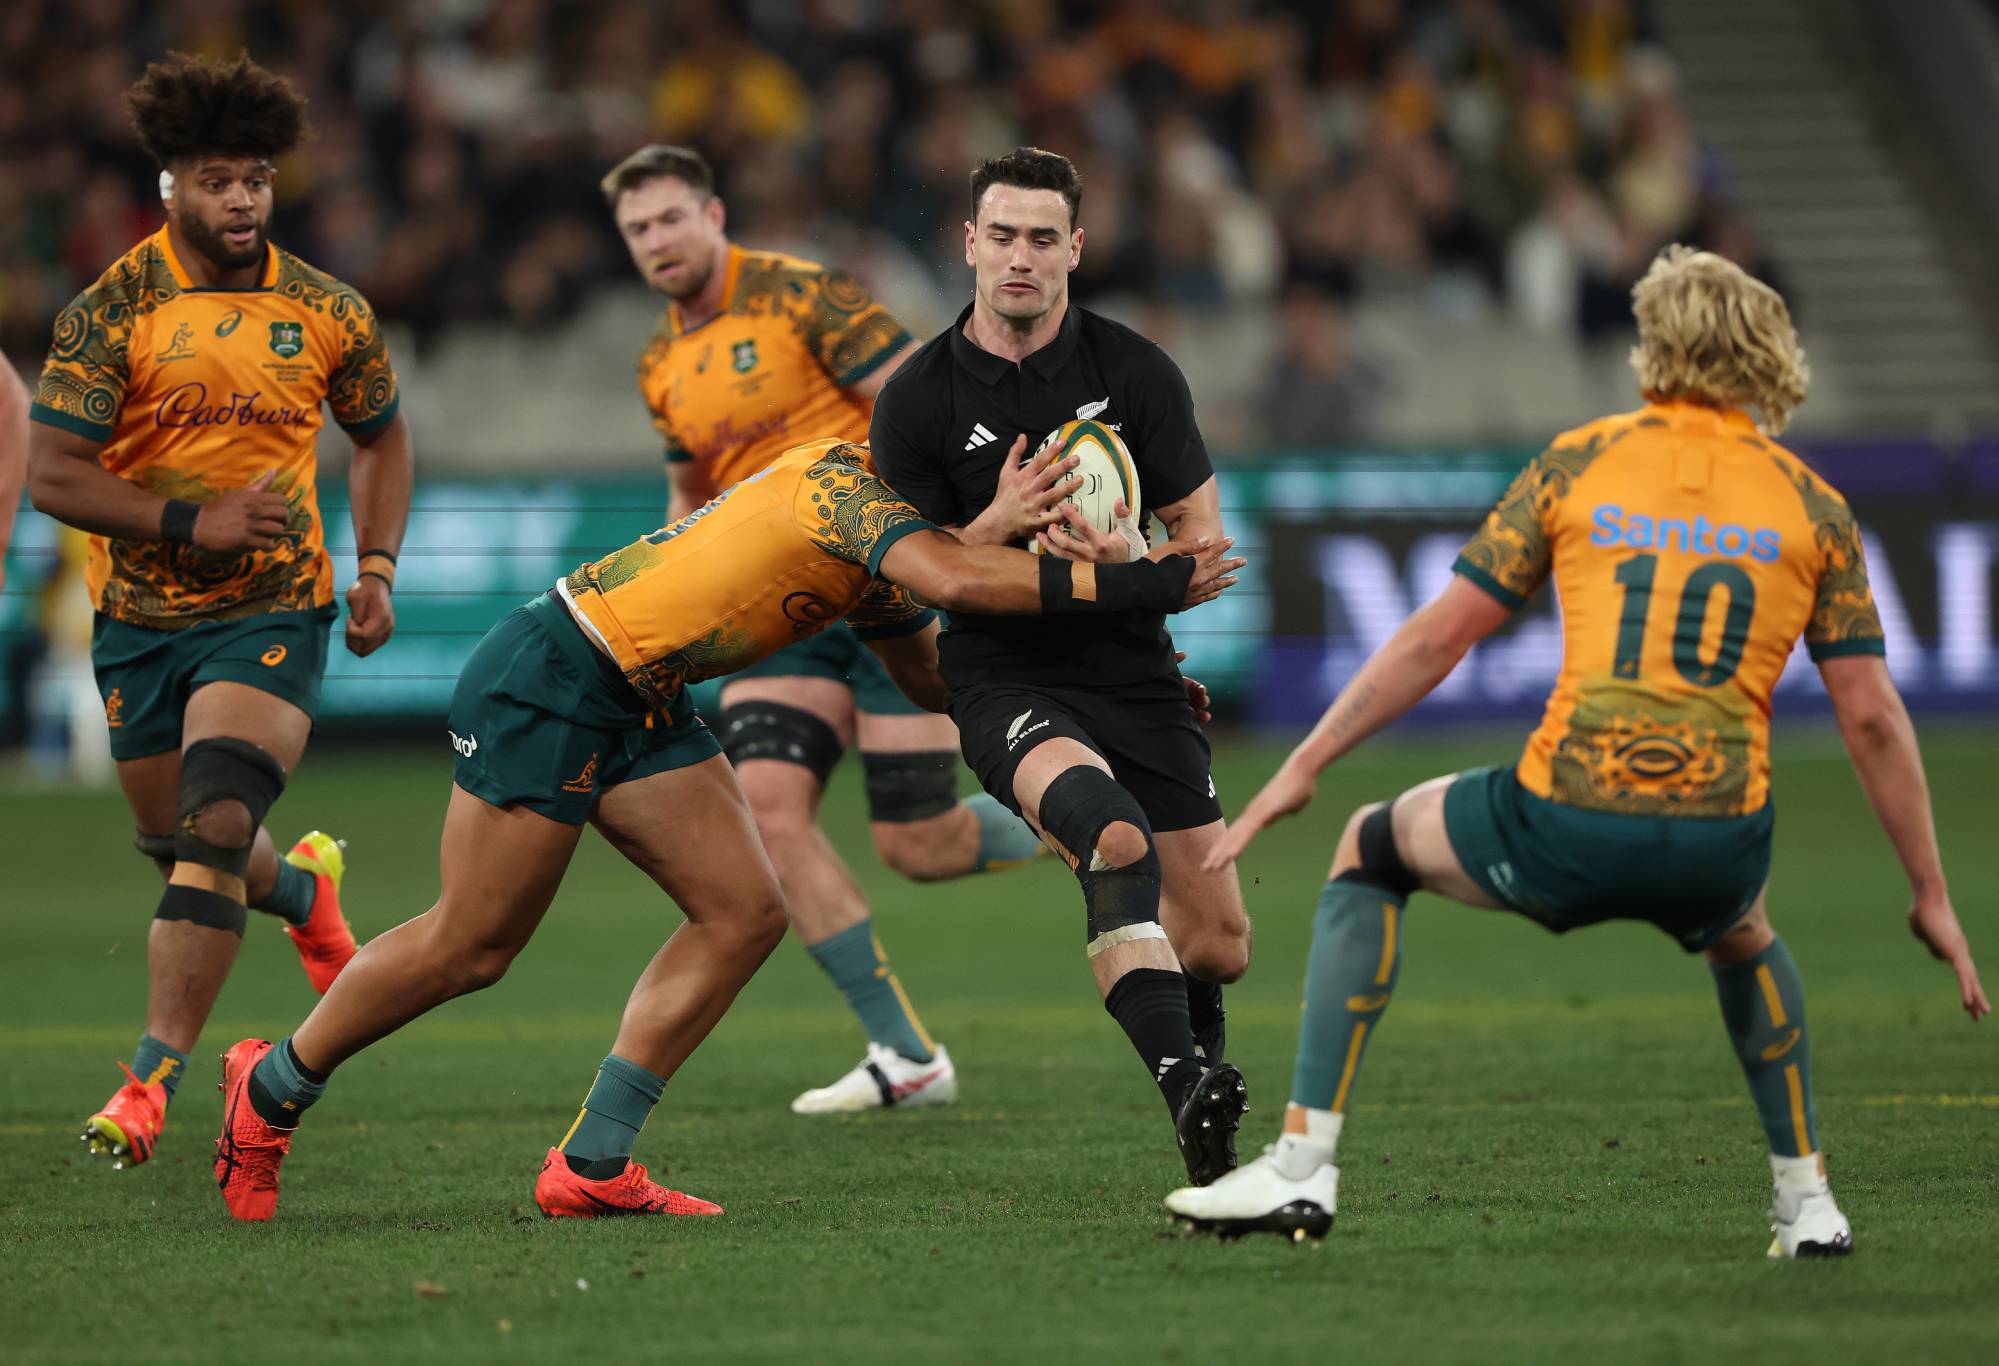 Will Jordan of the All Blacks is tackled during the The Rugby Championship & Bledisloe Cup match between the Australia Wallabies and the New Zealand All Blacks at Melbourne Cricket Ground on July 29, 2023 in Melbourne, Australia. (Photo by Robert Cianflone/Getty Images)